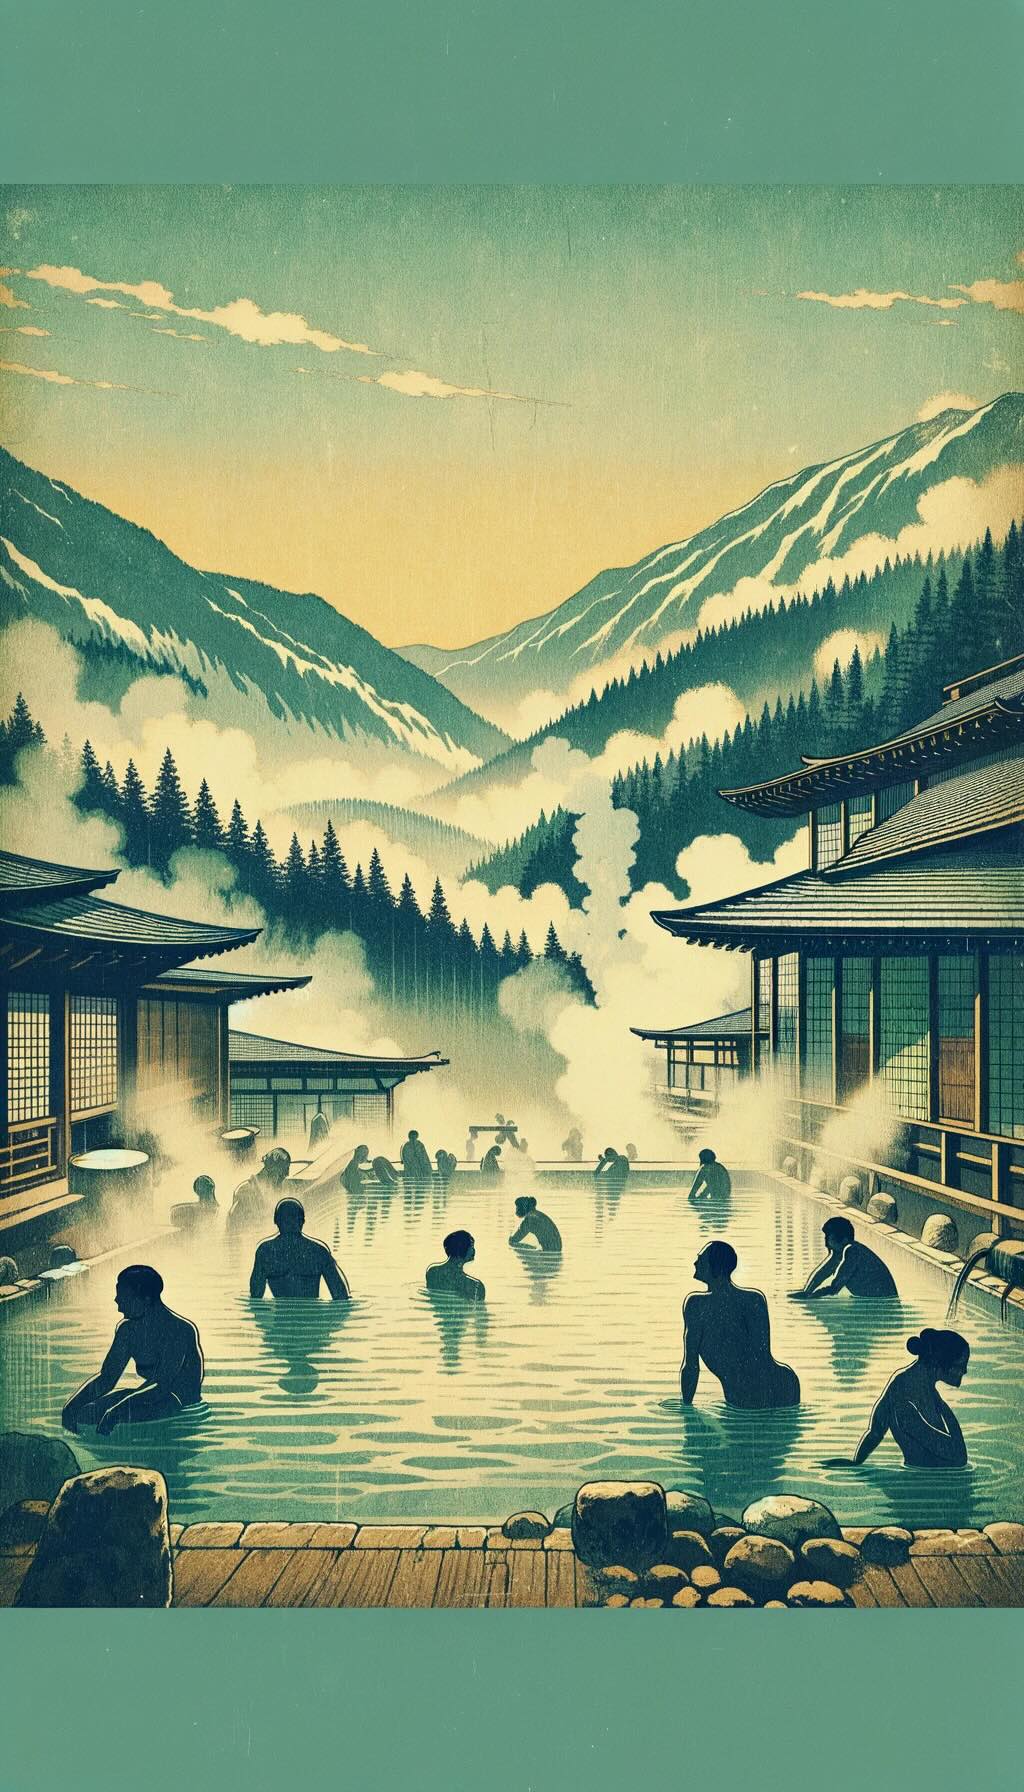 Tradition of bathing in ryokans, with a focus on the onsen experience captures the essence of onsen baths, including elements of both rotenburo (outdoor) and sento (public bathhouse) styles, set amid natural settings like mountain valleys or forests. The composition reflects the traditional communal bathing etiquette, with separate baths, shower stations, and modesty towels. This artistic representation conveys the therapeutic and spiritual aspects of the onsen, emphasizing the connection with nature, mindfulness, and community. The combination of styles creates a serene and reverential atmosphere, capturing the unique essence of the Japanese onsen experience.